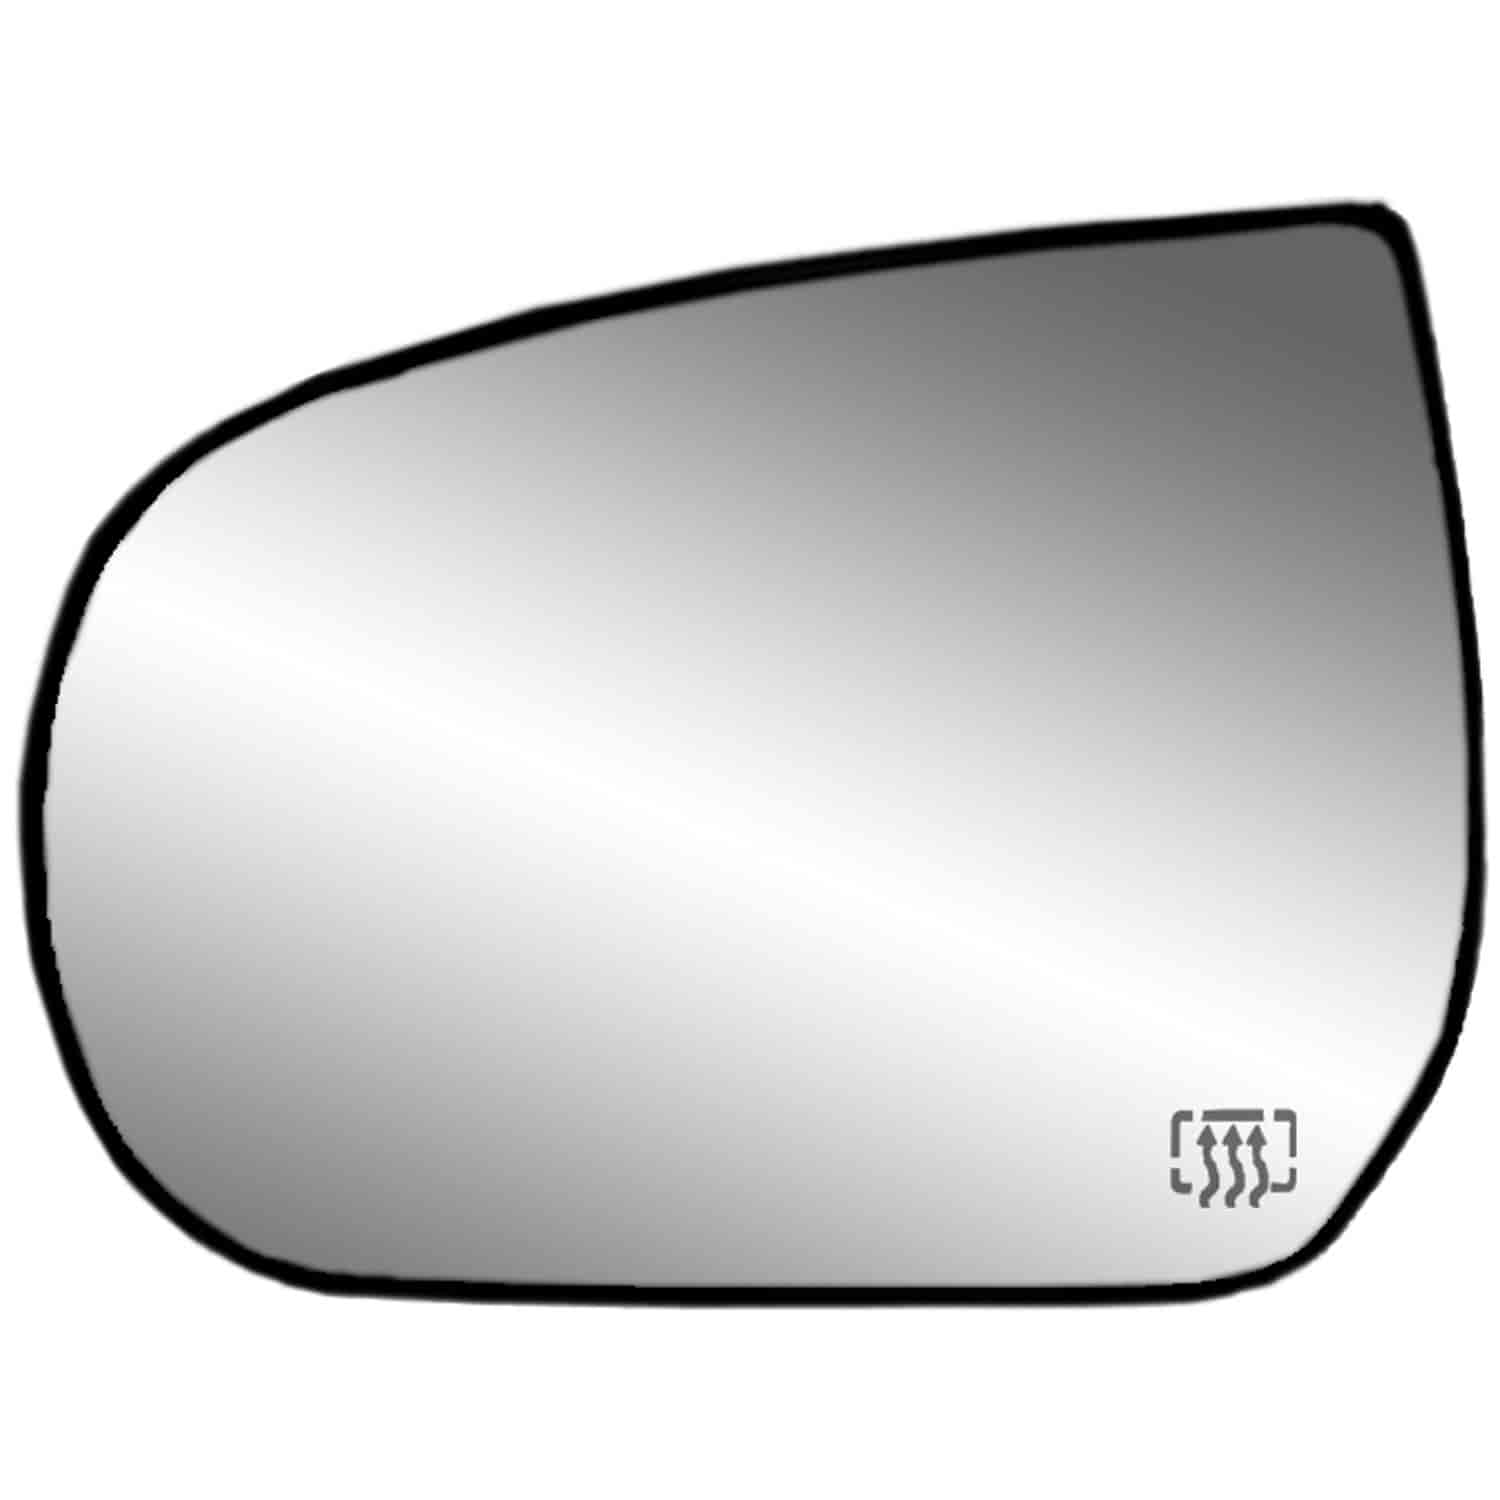 Heated Replacement Glass Assembly for 01-07 Escape; 05-07 Mariner replace your cracked or broken dri